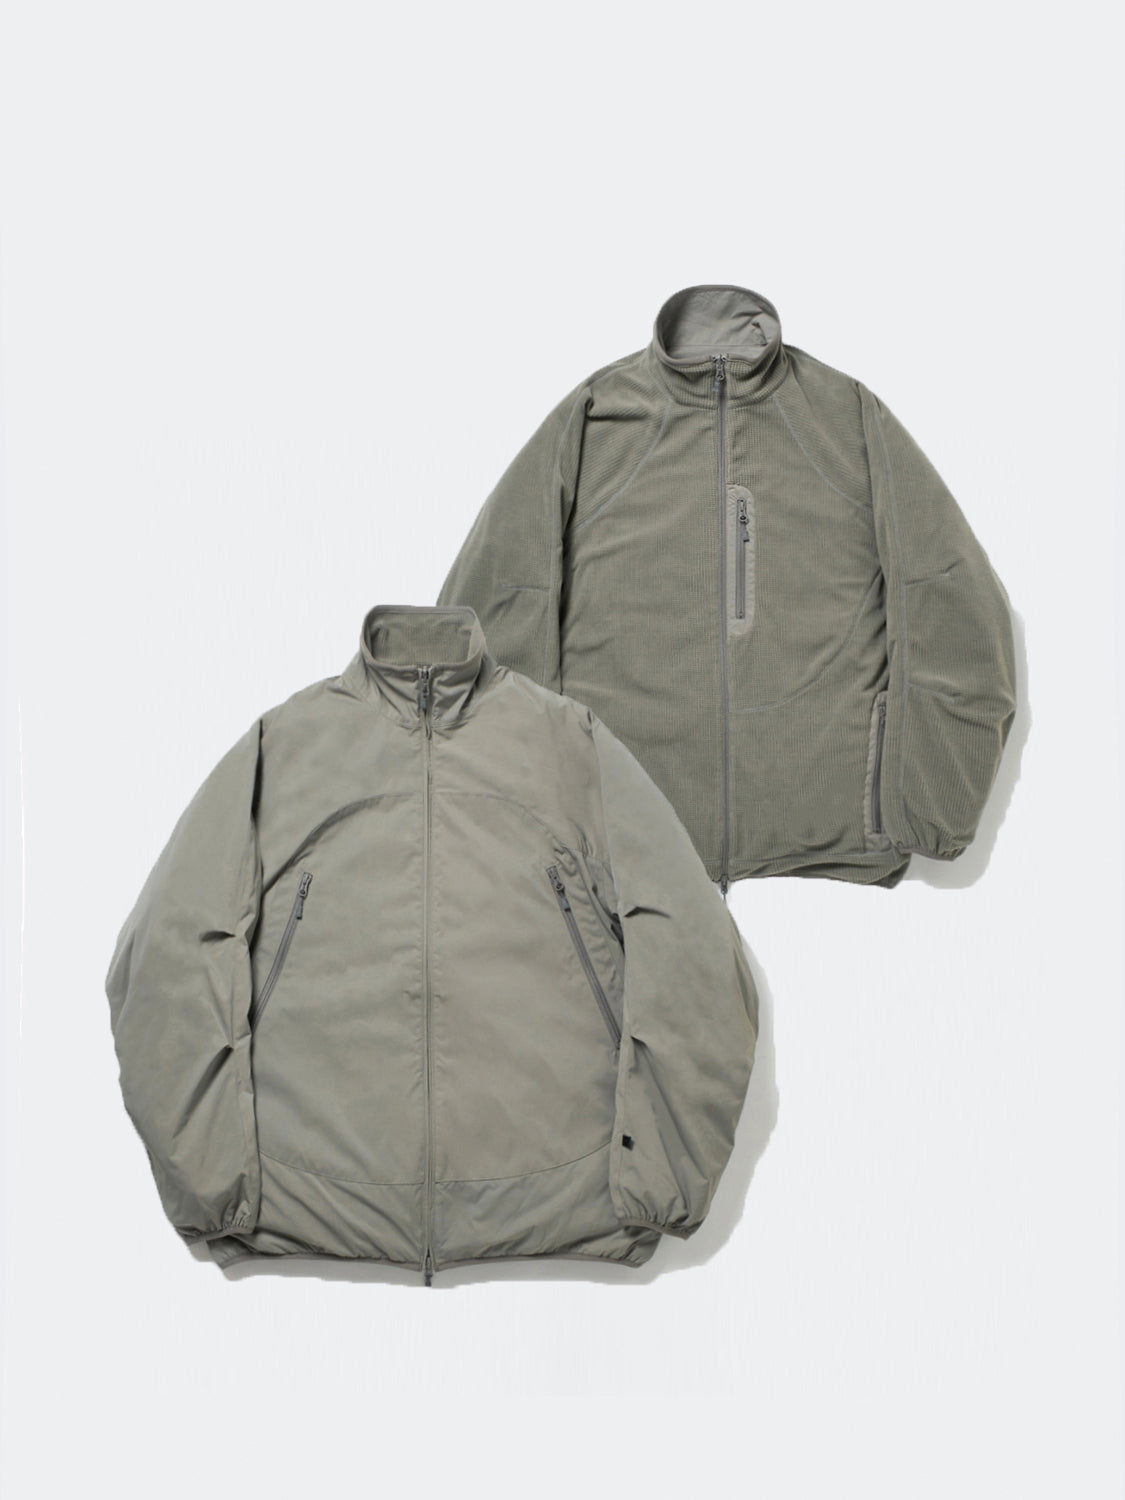 DAIWA PIER39 TECH REVERSIBLE MIL ECWCS STAND JACKET – unexpected store